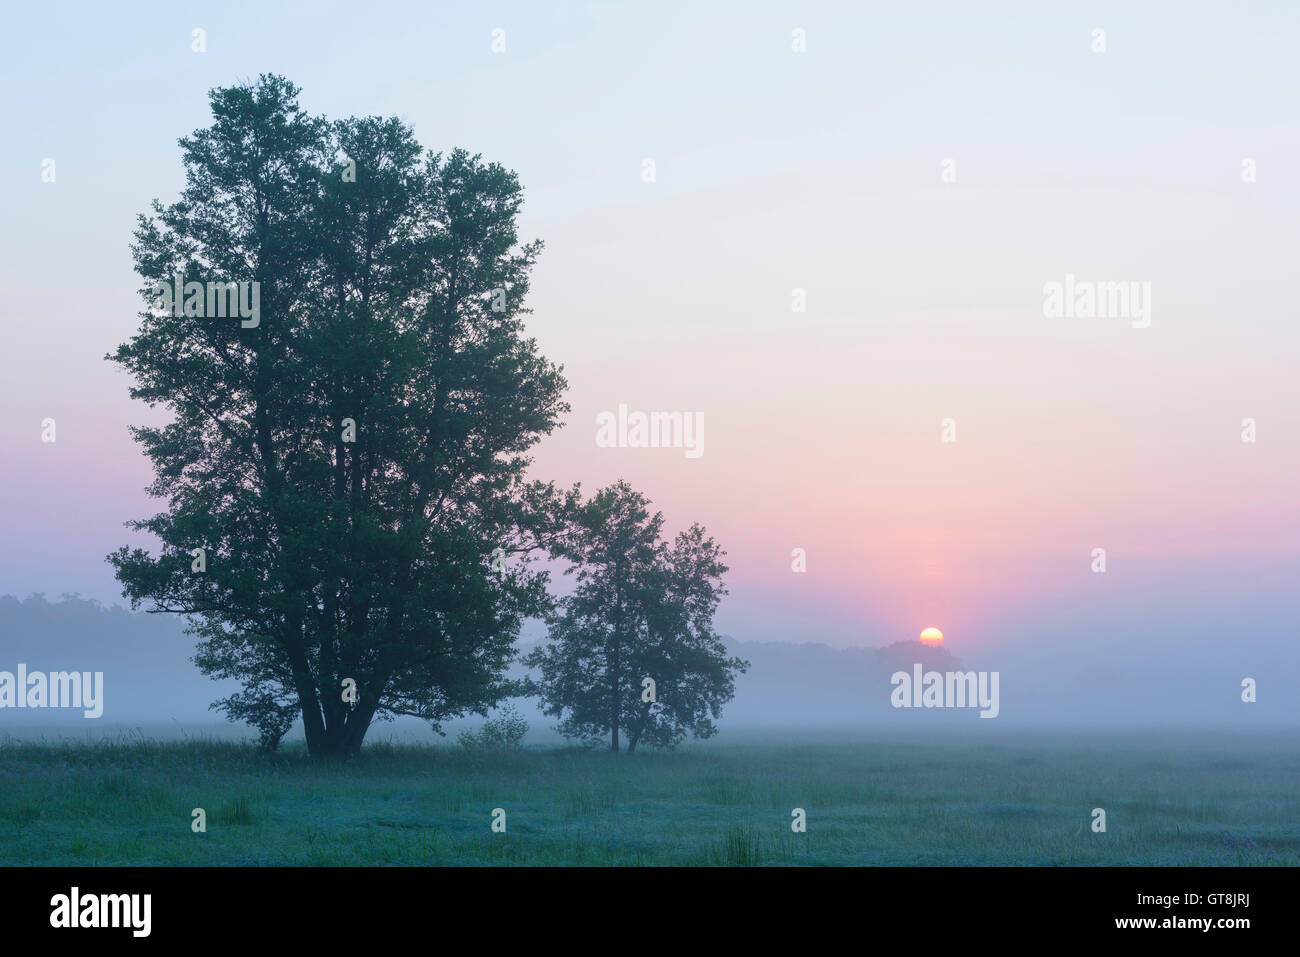 Ontano nero in Early Morning Mist a Sunrise, Hesse, Germania Foto Stock